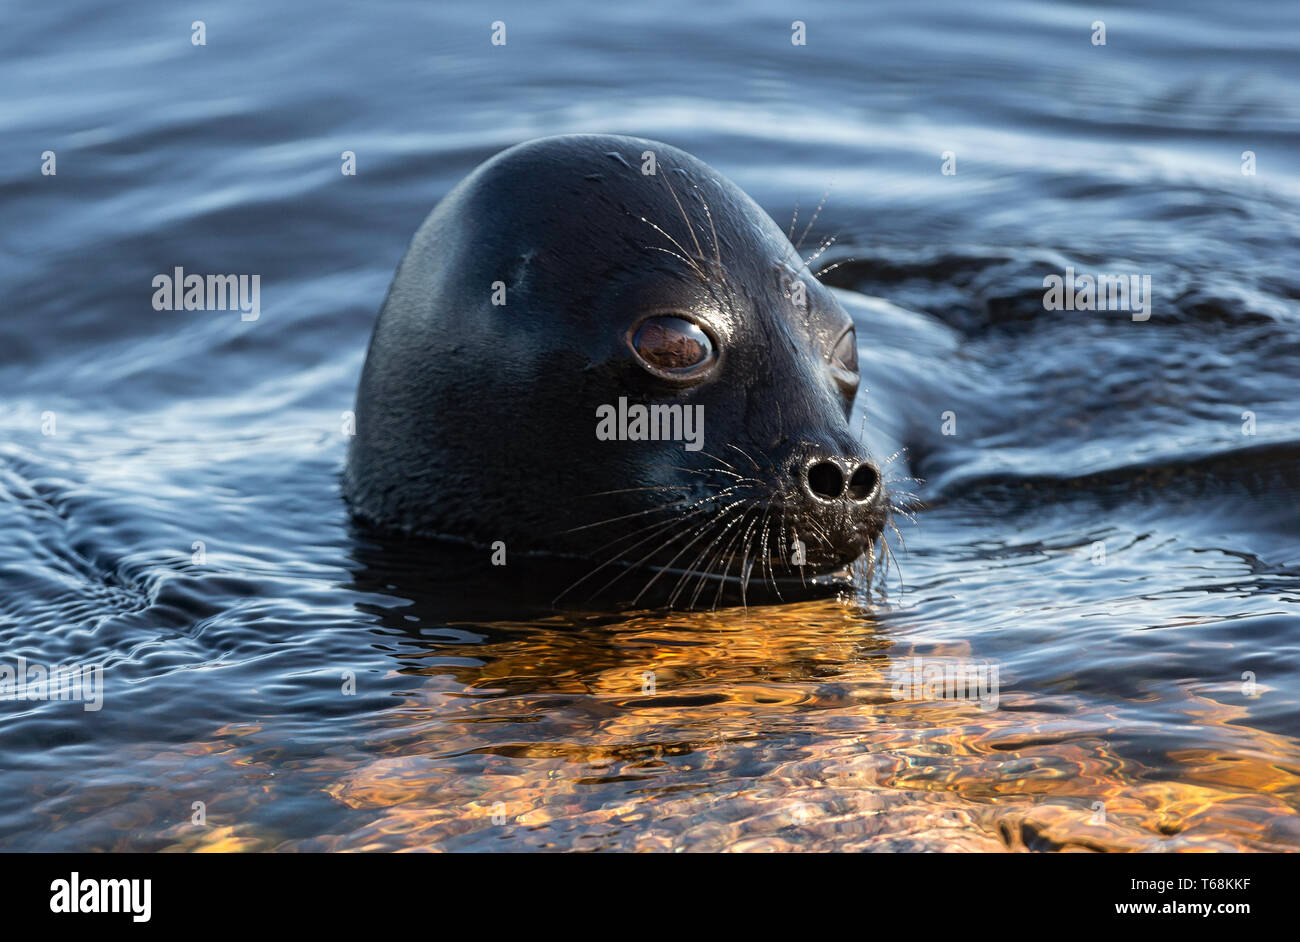 The Ladoga ringed seal swimming in the water. Blue water background.  Scientific name: Pusa hispida ladogensis. The Ladoga seal in a natural habitat.  Stock Photo